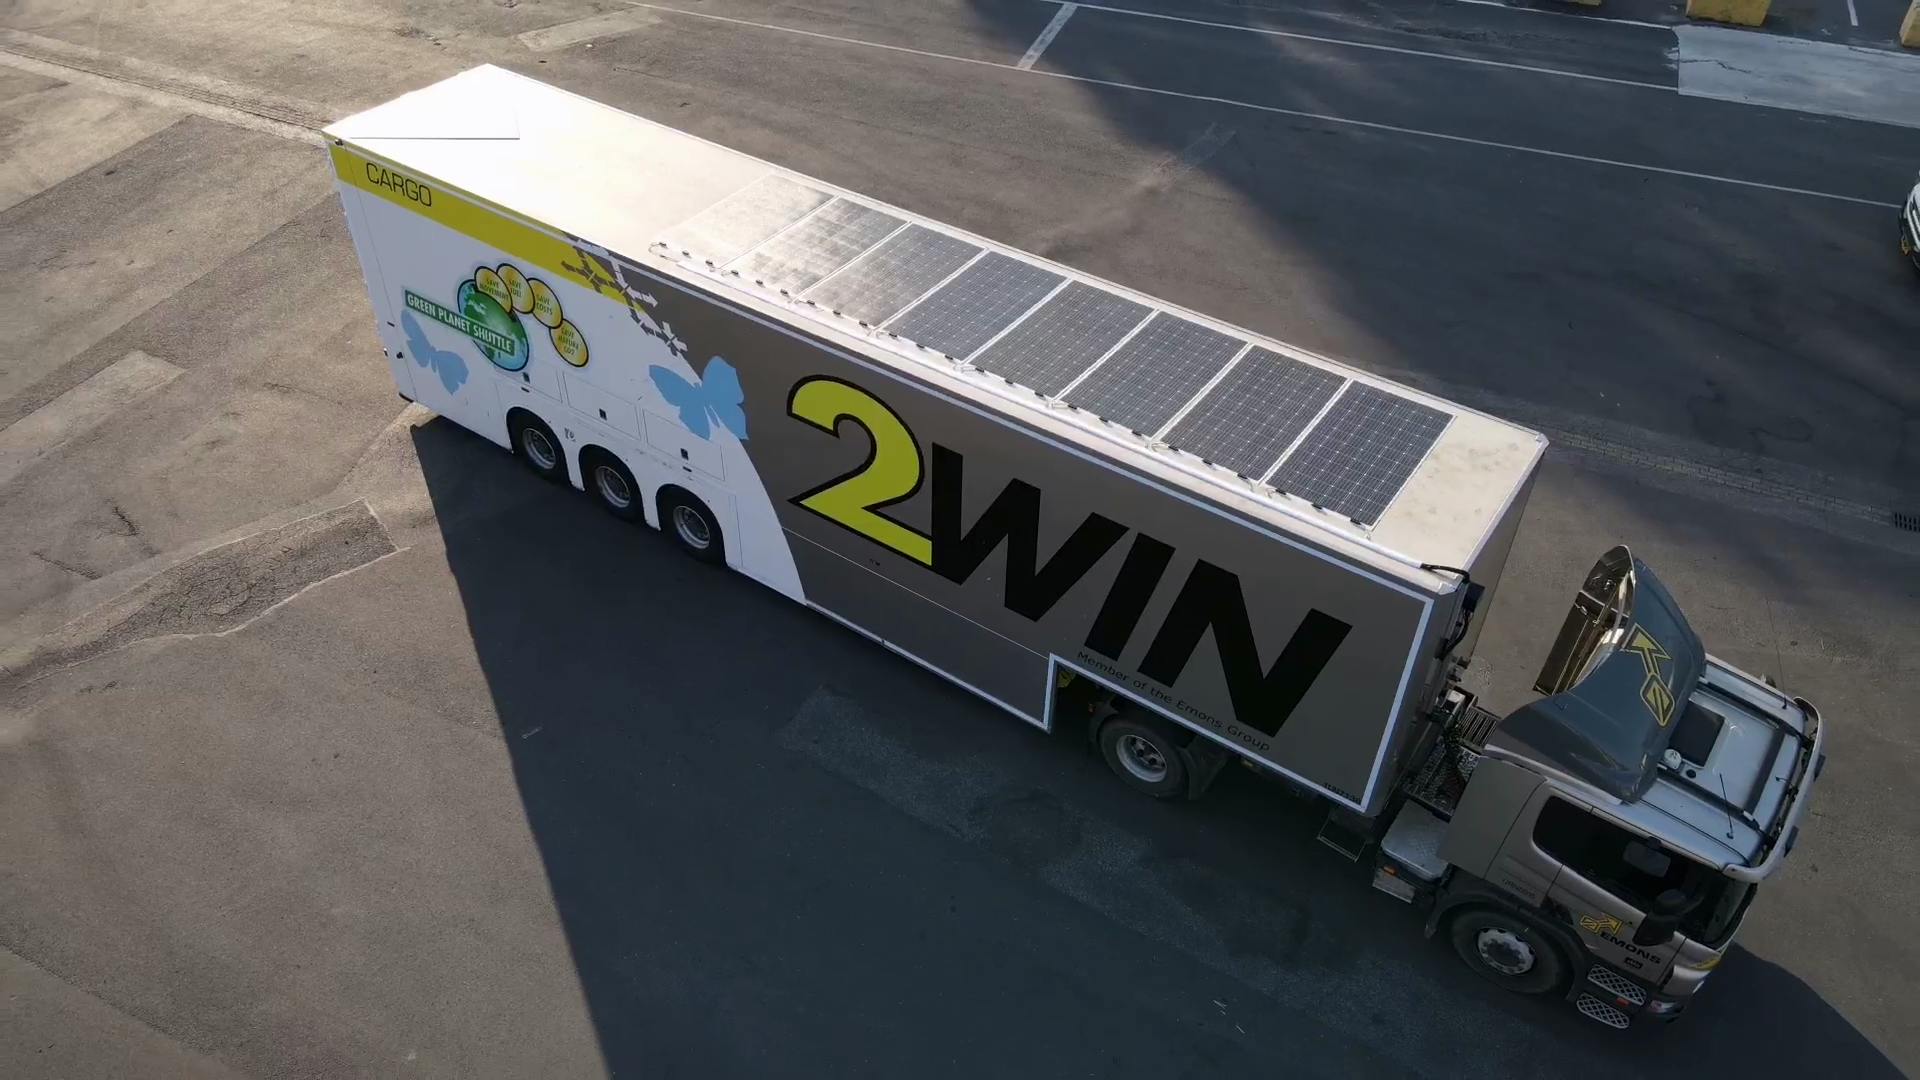 Emons powers its truck with solar panels through SolarOnTop 